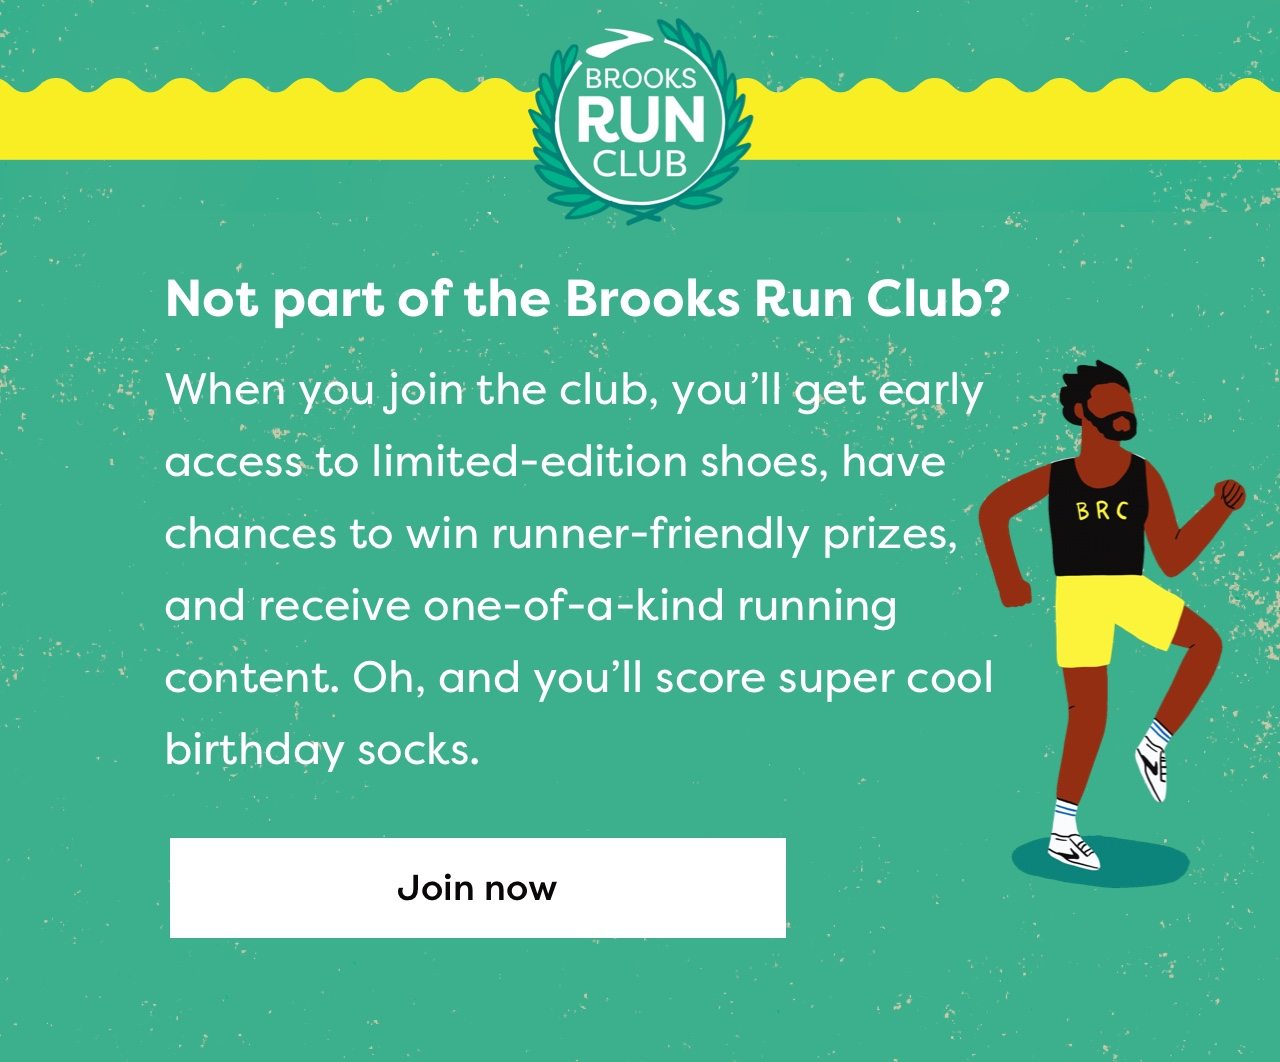 BROOKS RUN CLUB | Not part of the Brooks Run Club? When you join the club, you'll get early access to limited-edition shoes, have chances to win runner-friendly prizes, and receive one-of-a-kind running content. Oh, and you'll score super cool birthday socks. | Join now